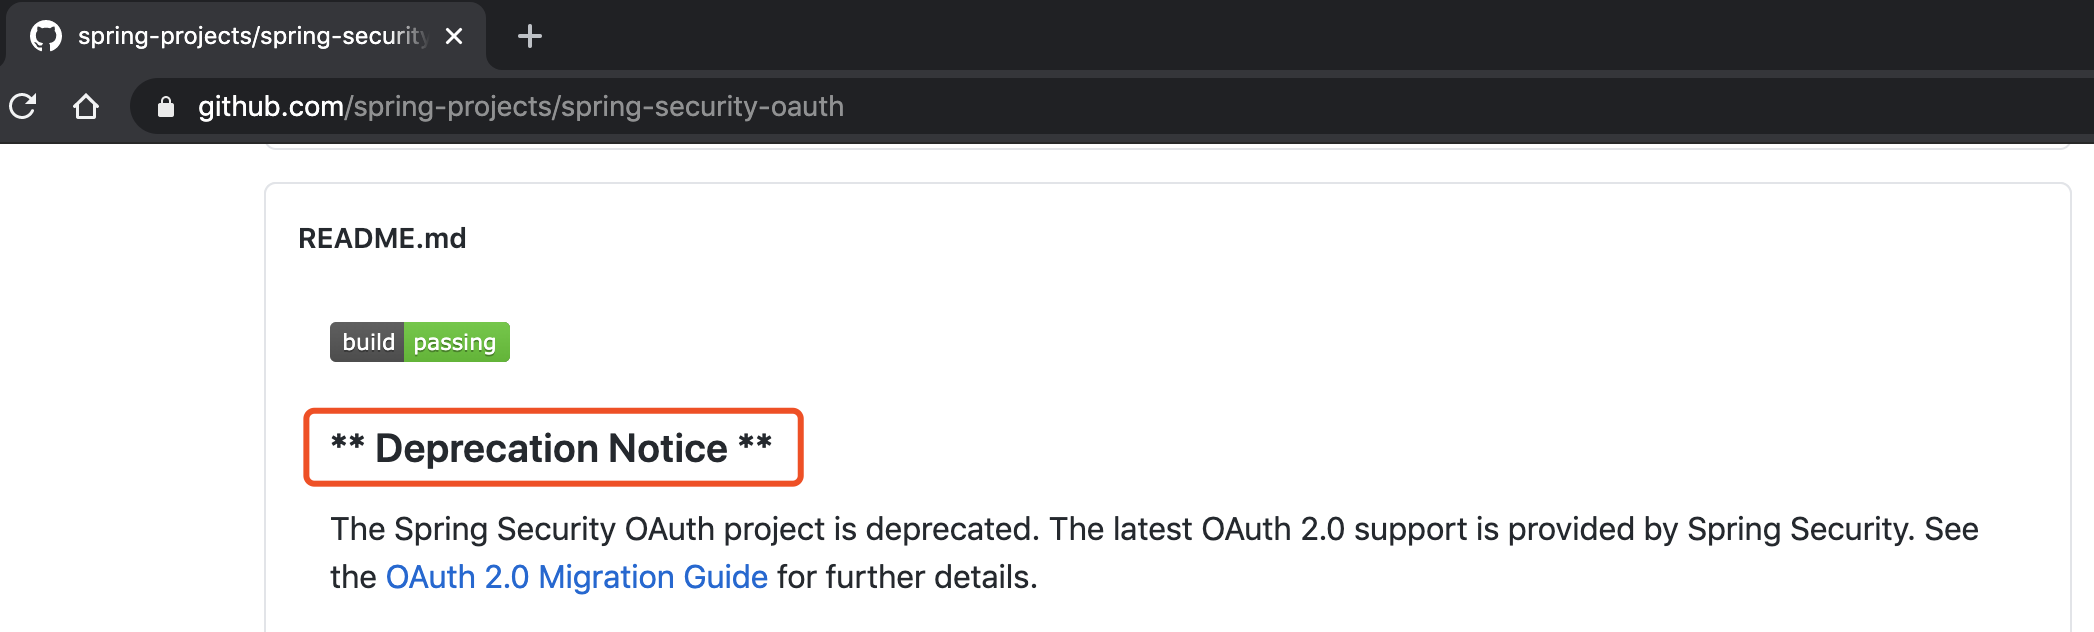 Spring Security OAuth 被废弃